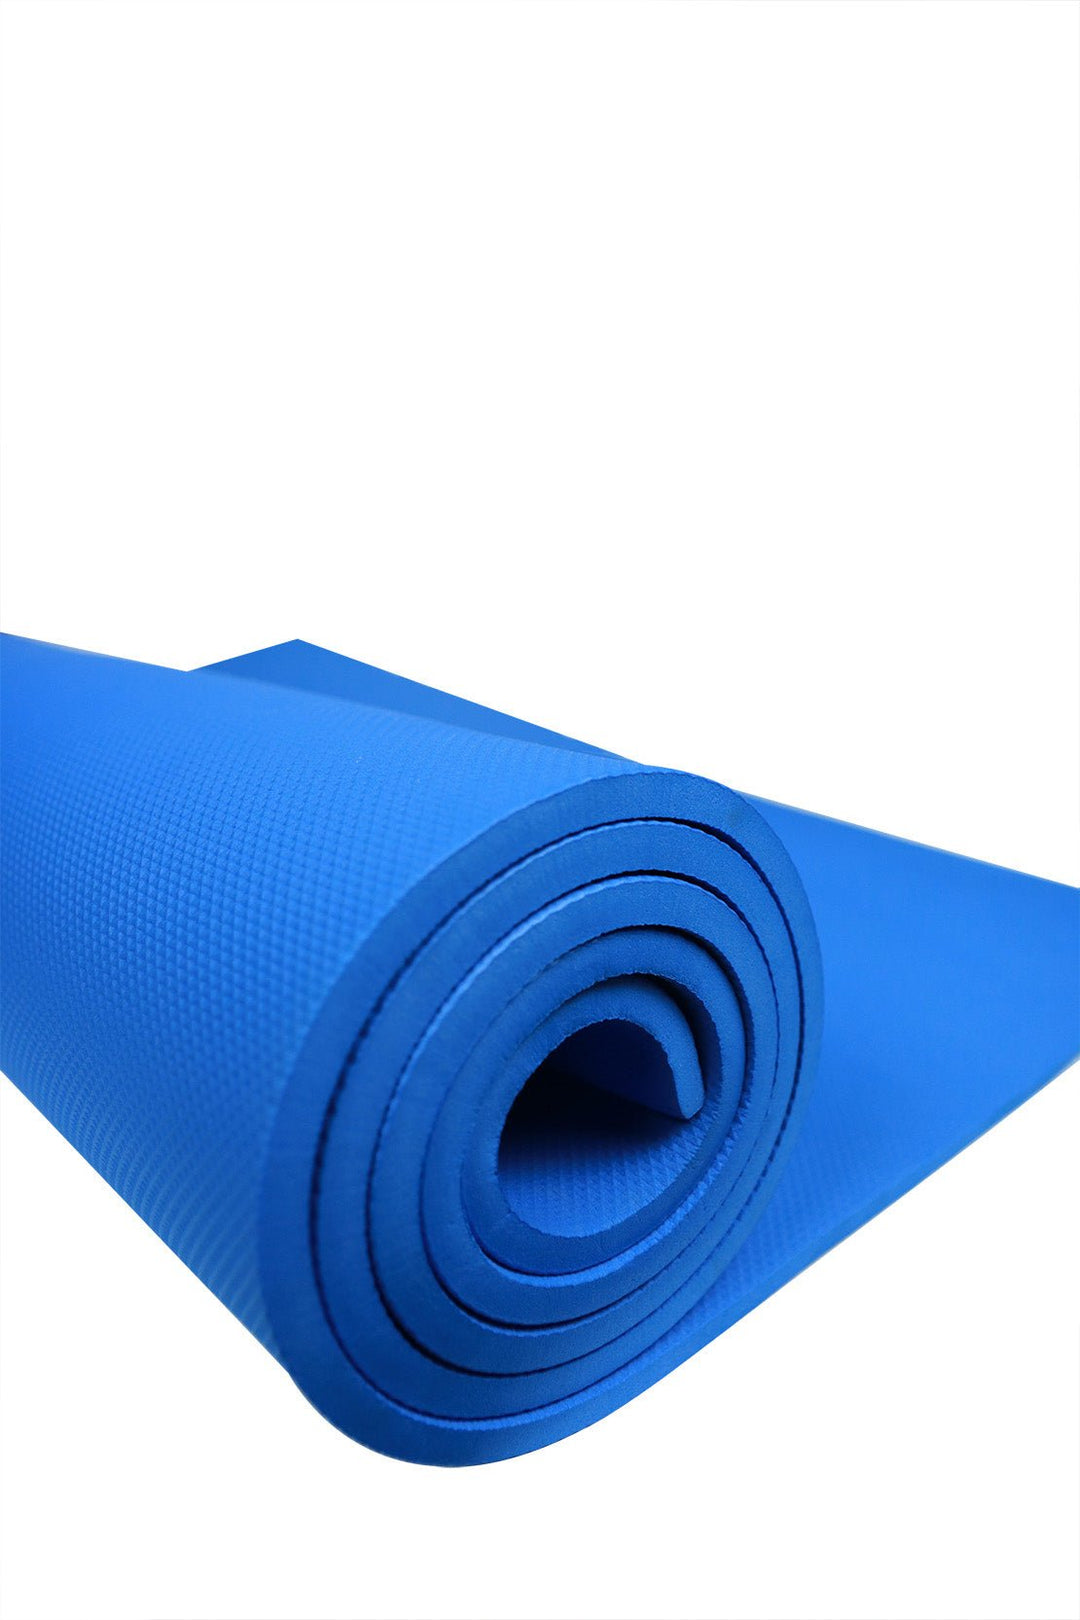 10 mm Thick Yoga Mat for Indoor and Outdoor Use, BLUE - V Surfaces